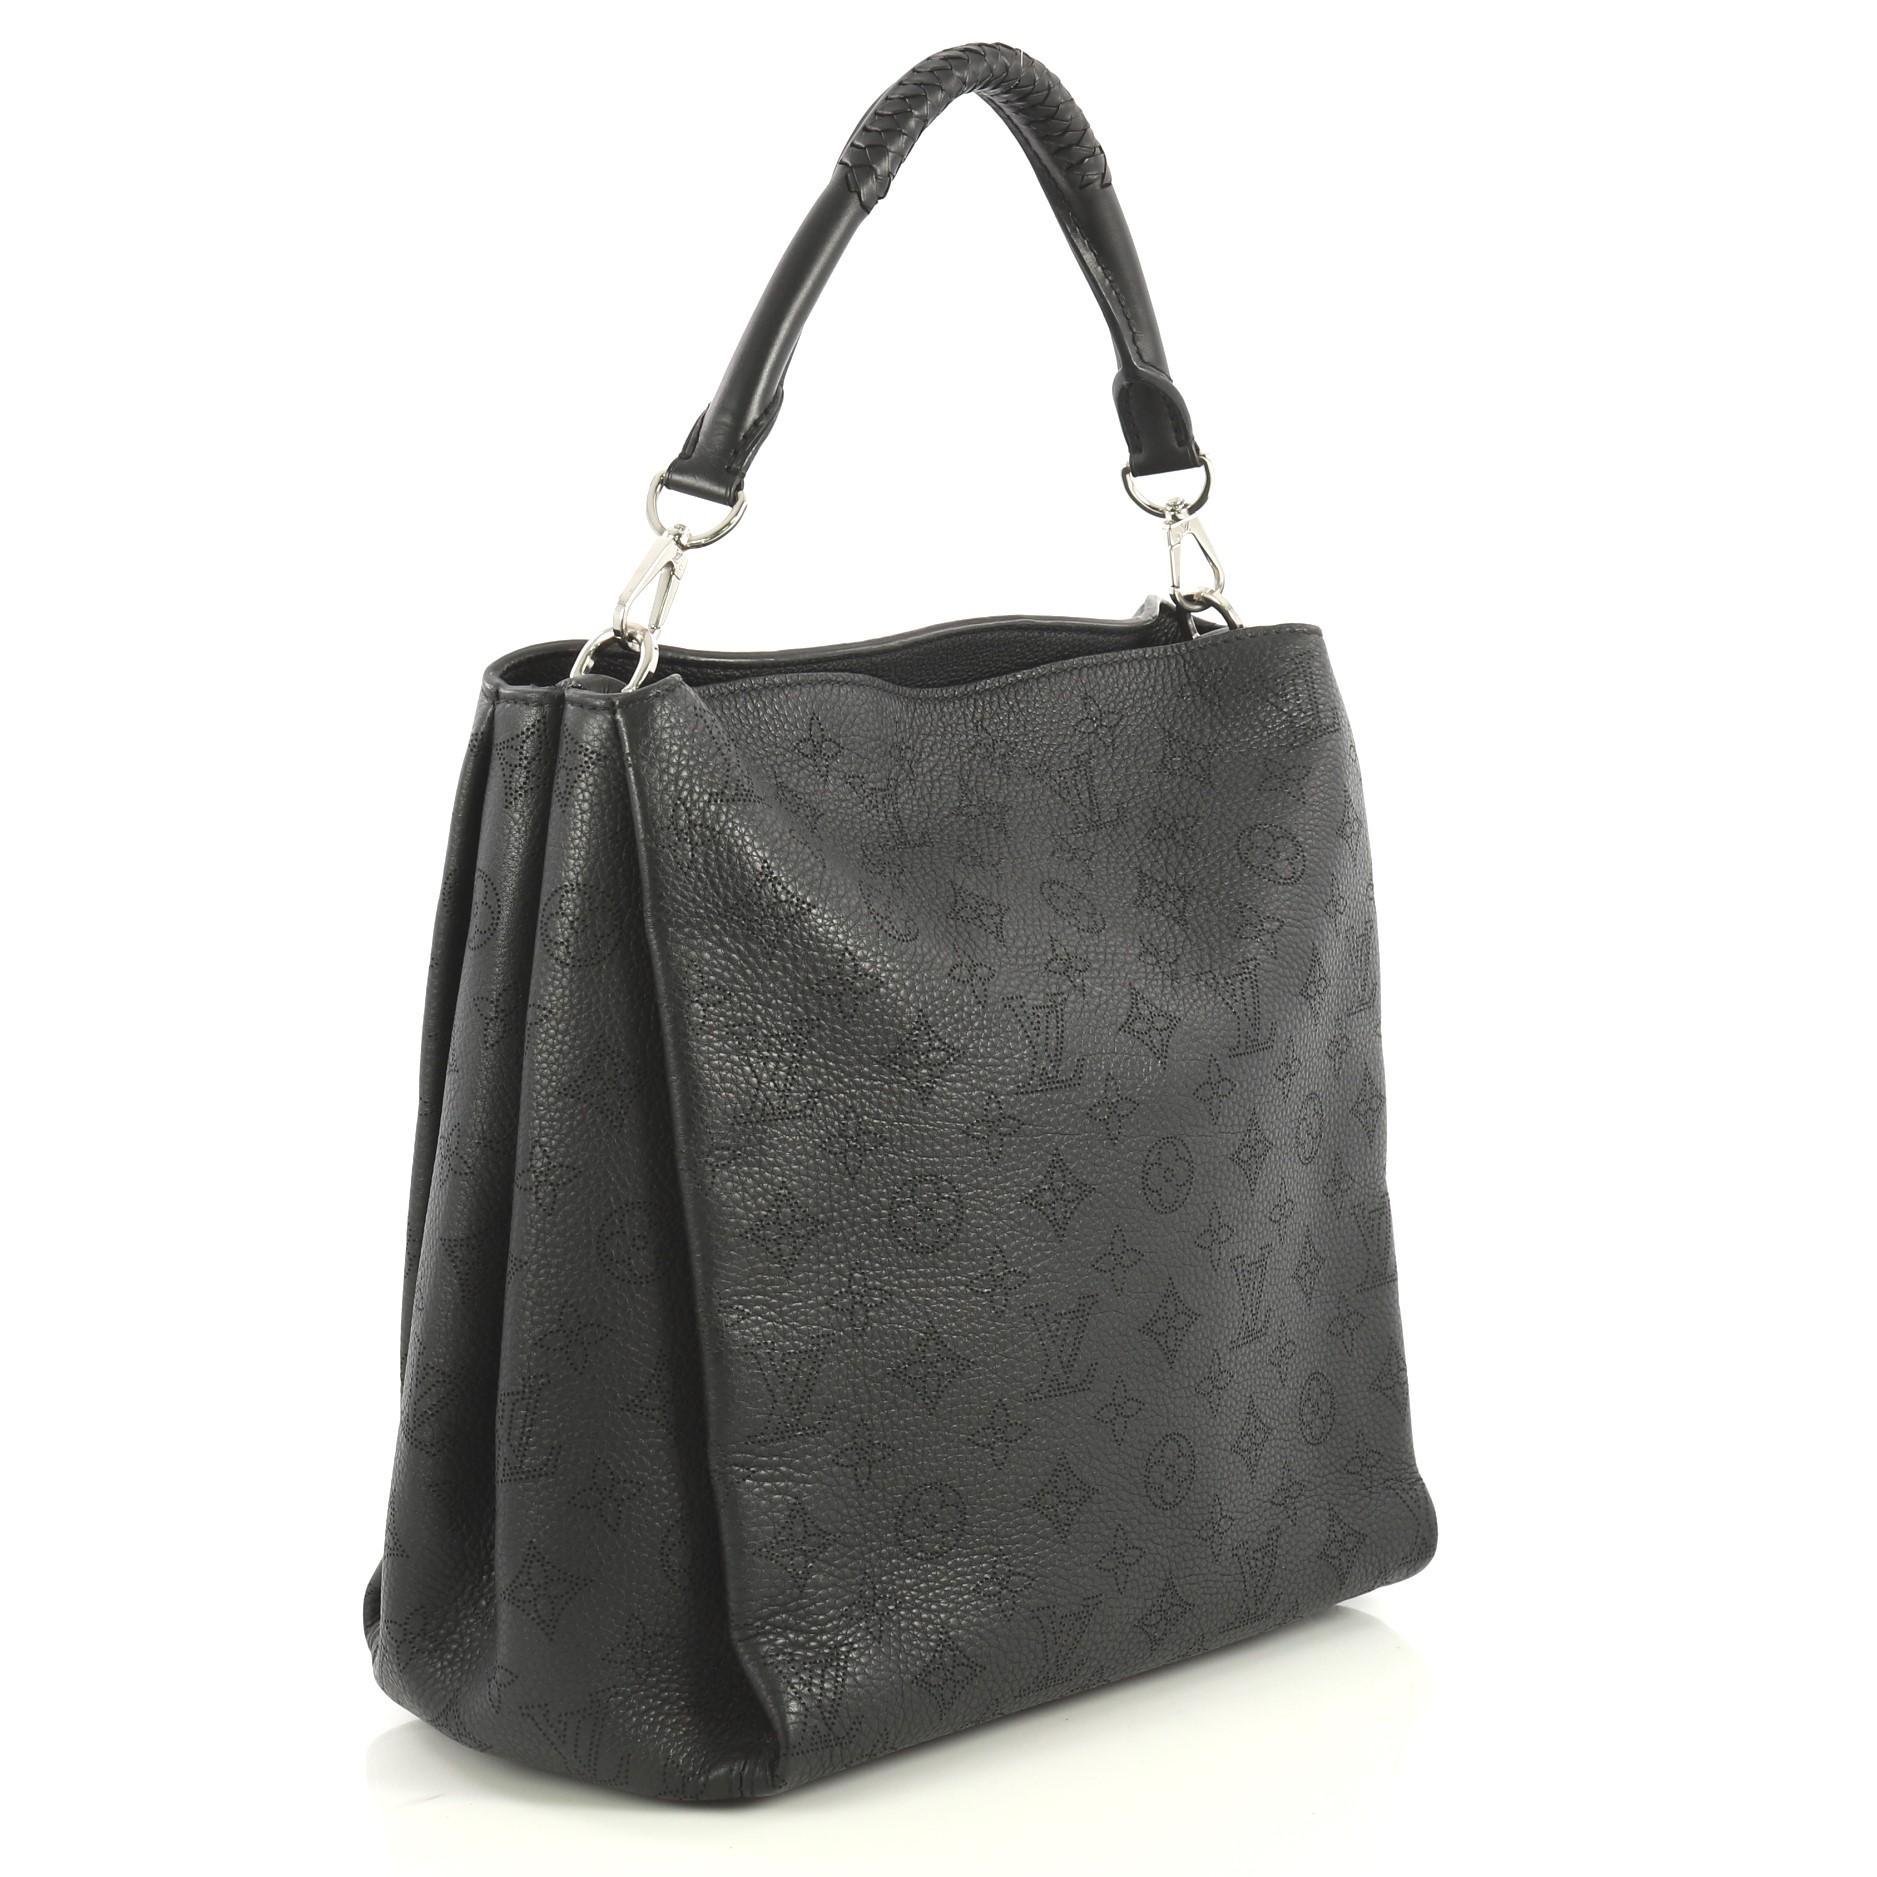 This Louis Vuitton Babylone Handbag Mahina Leather PM, crafted in black mahina leather, features a braided leather top handle with woven trim and silver-tone hardware. It opens to a neutral microfiber interior with zip and slip pockets. Authenticity